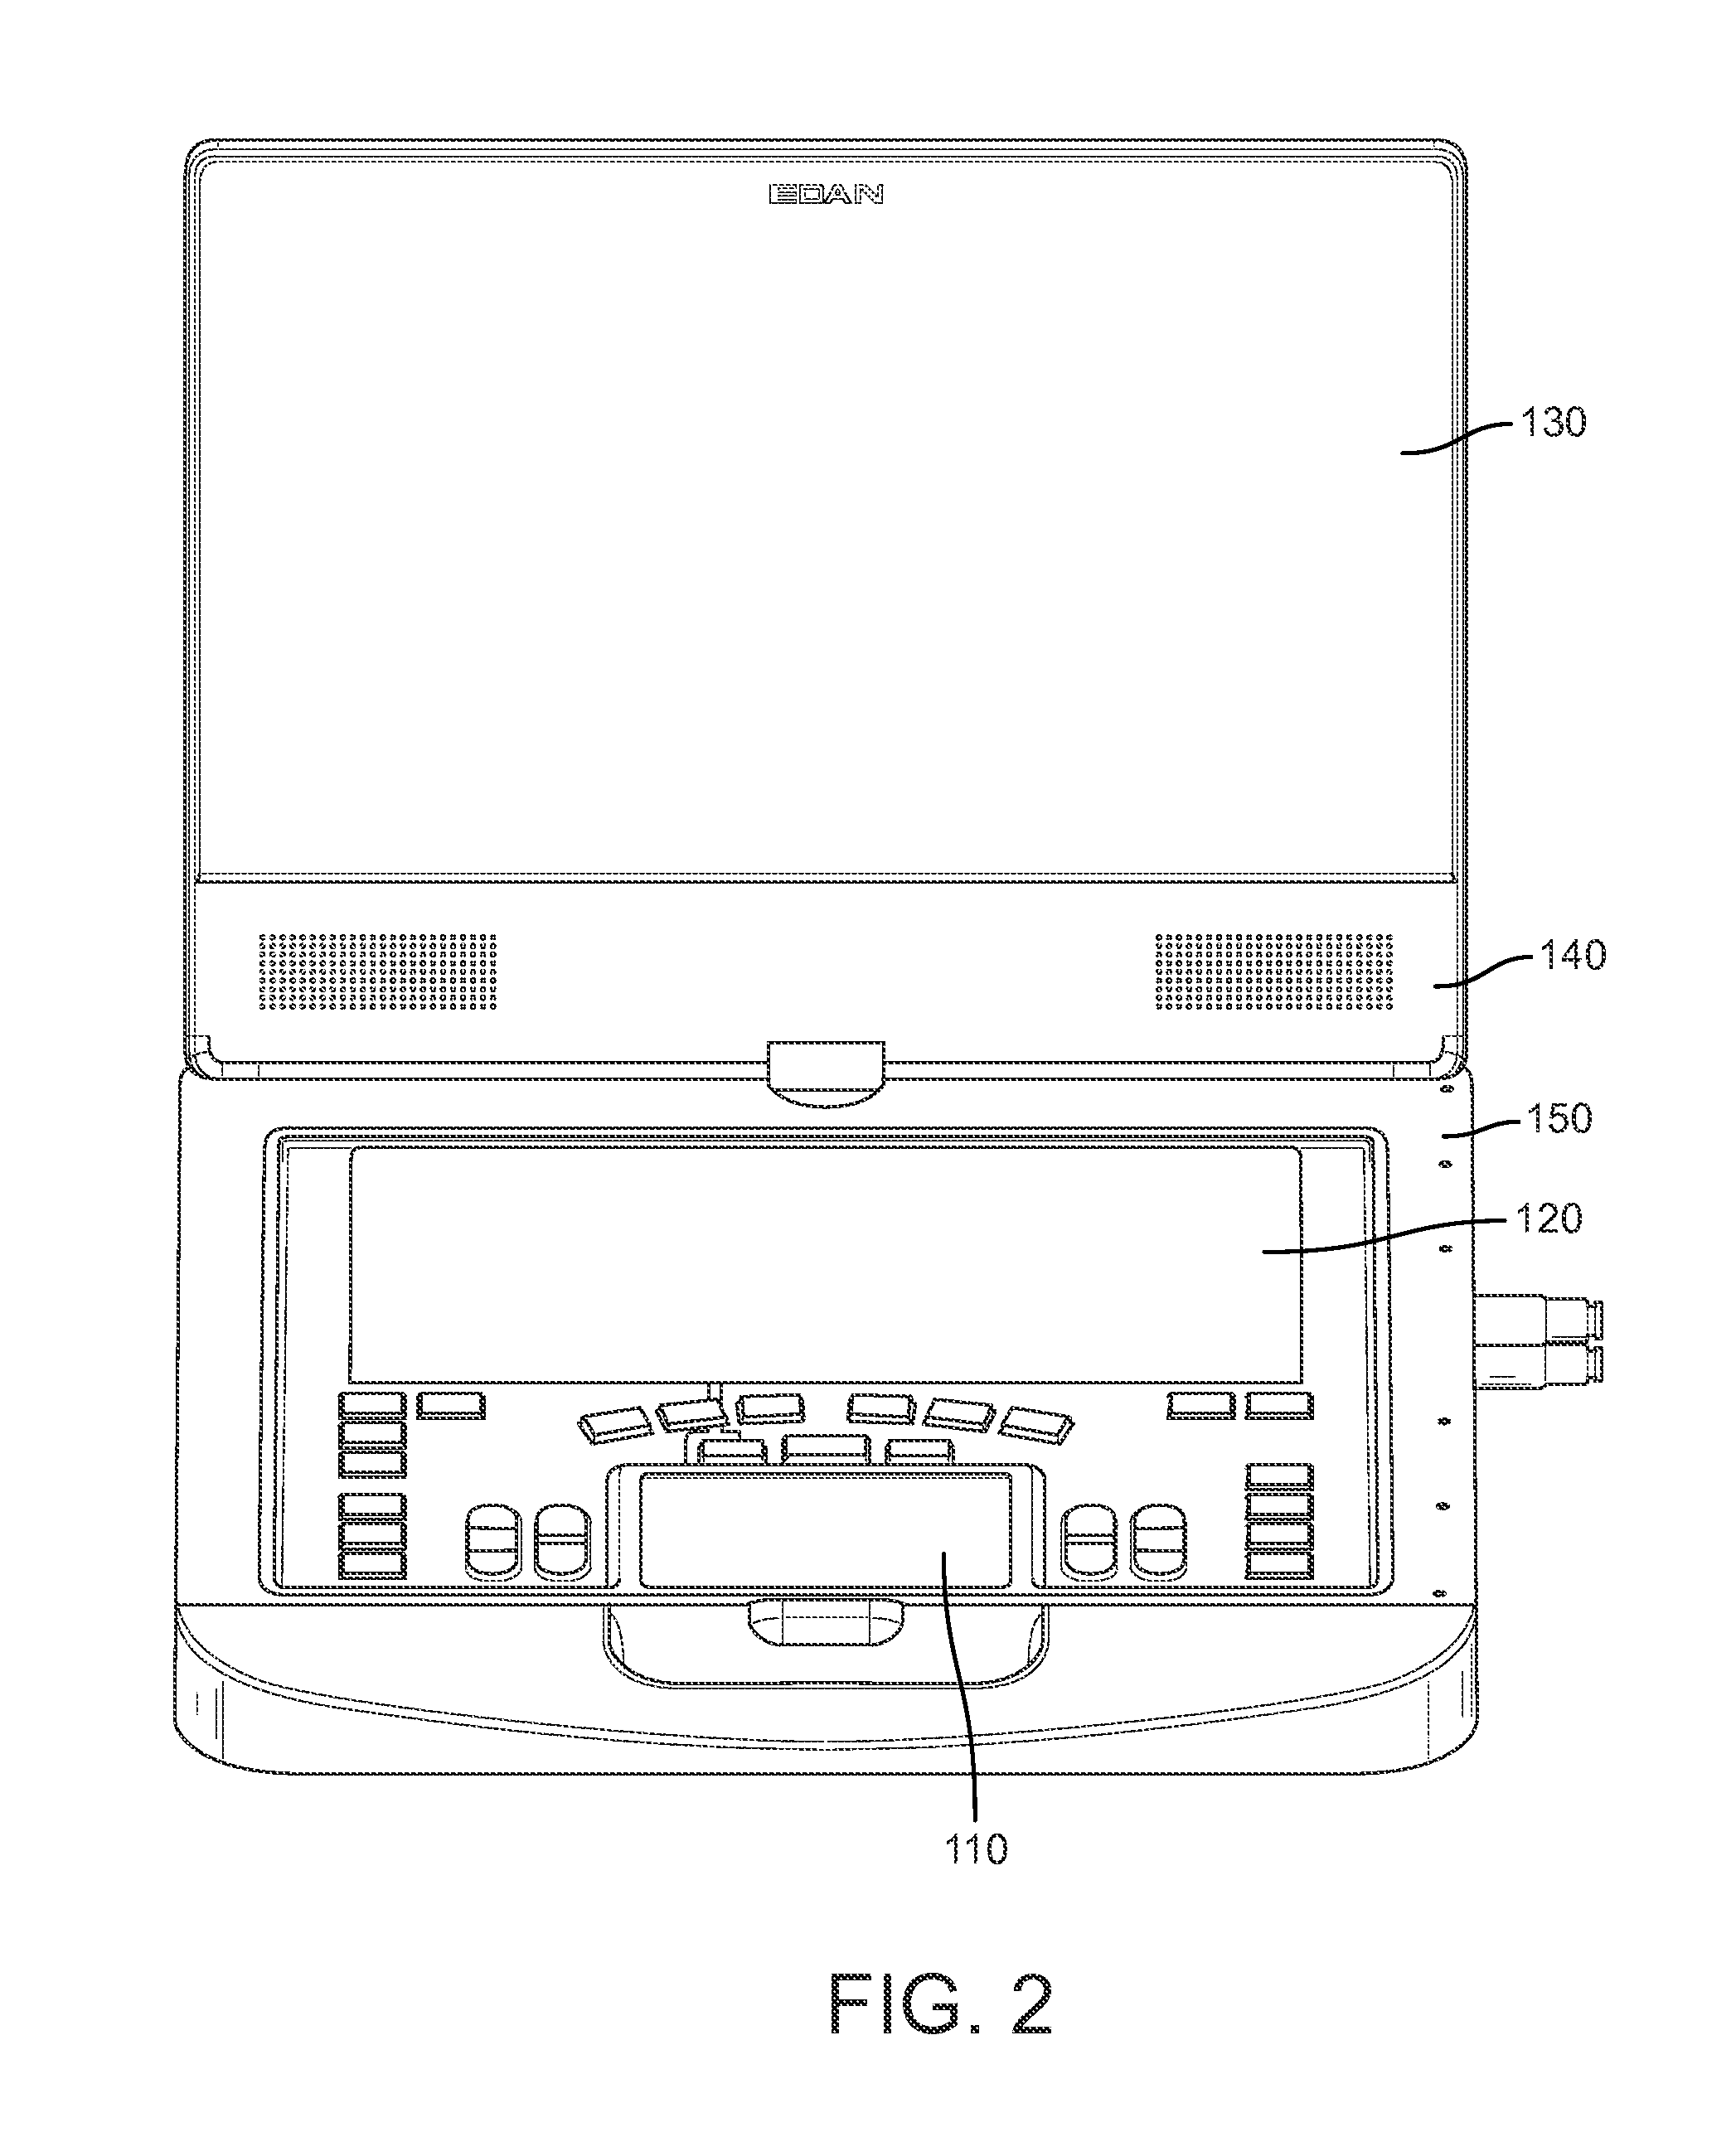 Portable ultrasound user interface and resource management systems and methods